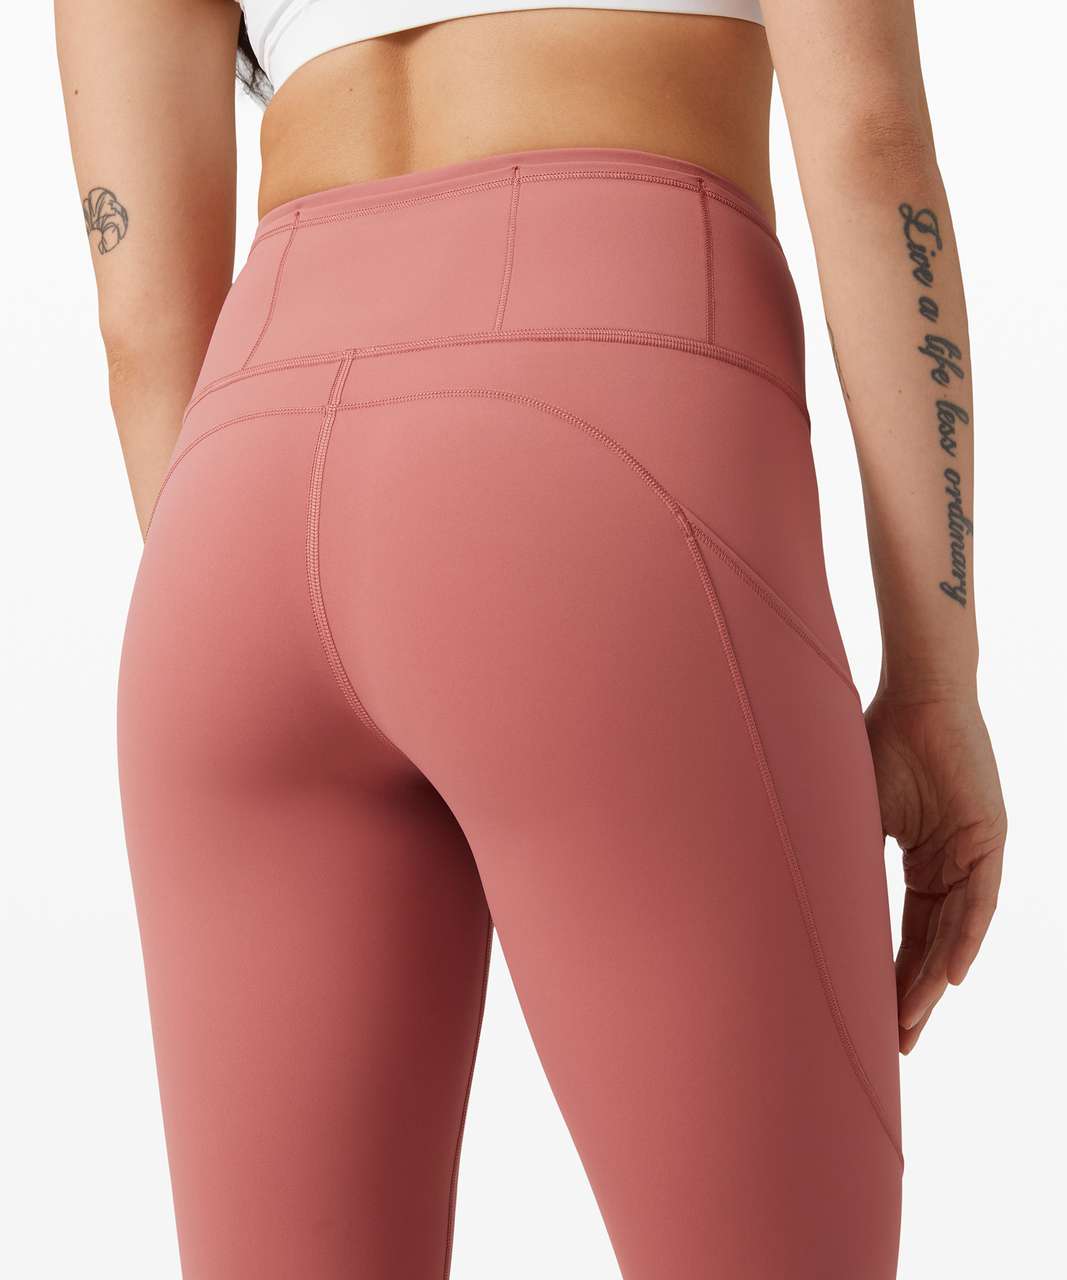 Lululemon Nulux fabric is incredibly lightweight, silky smooth, and dries  lightning-fast—you have to try it for yourself.